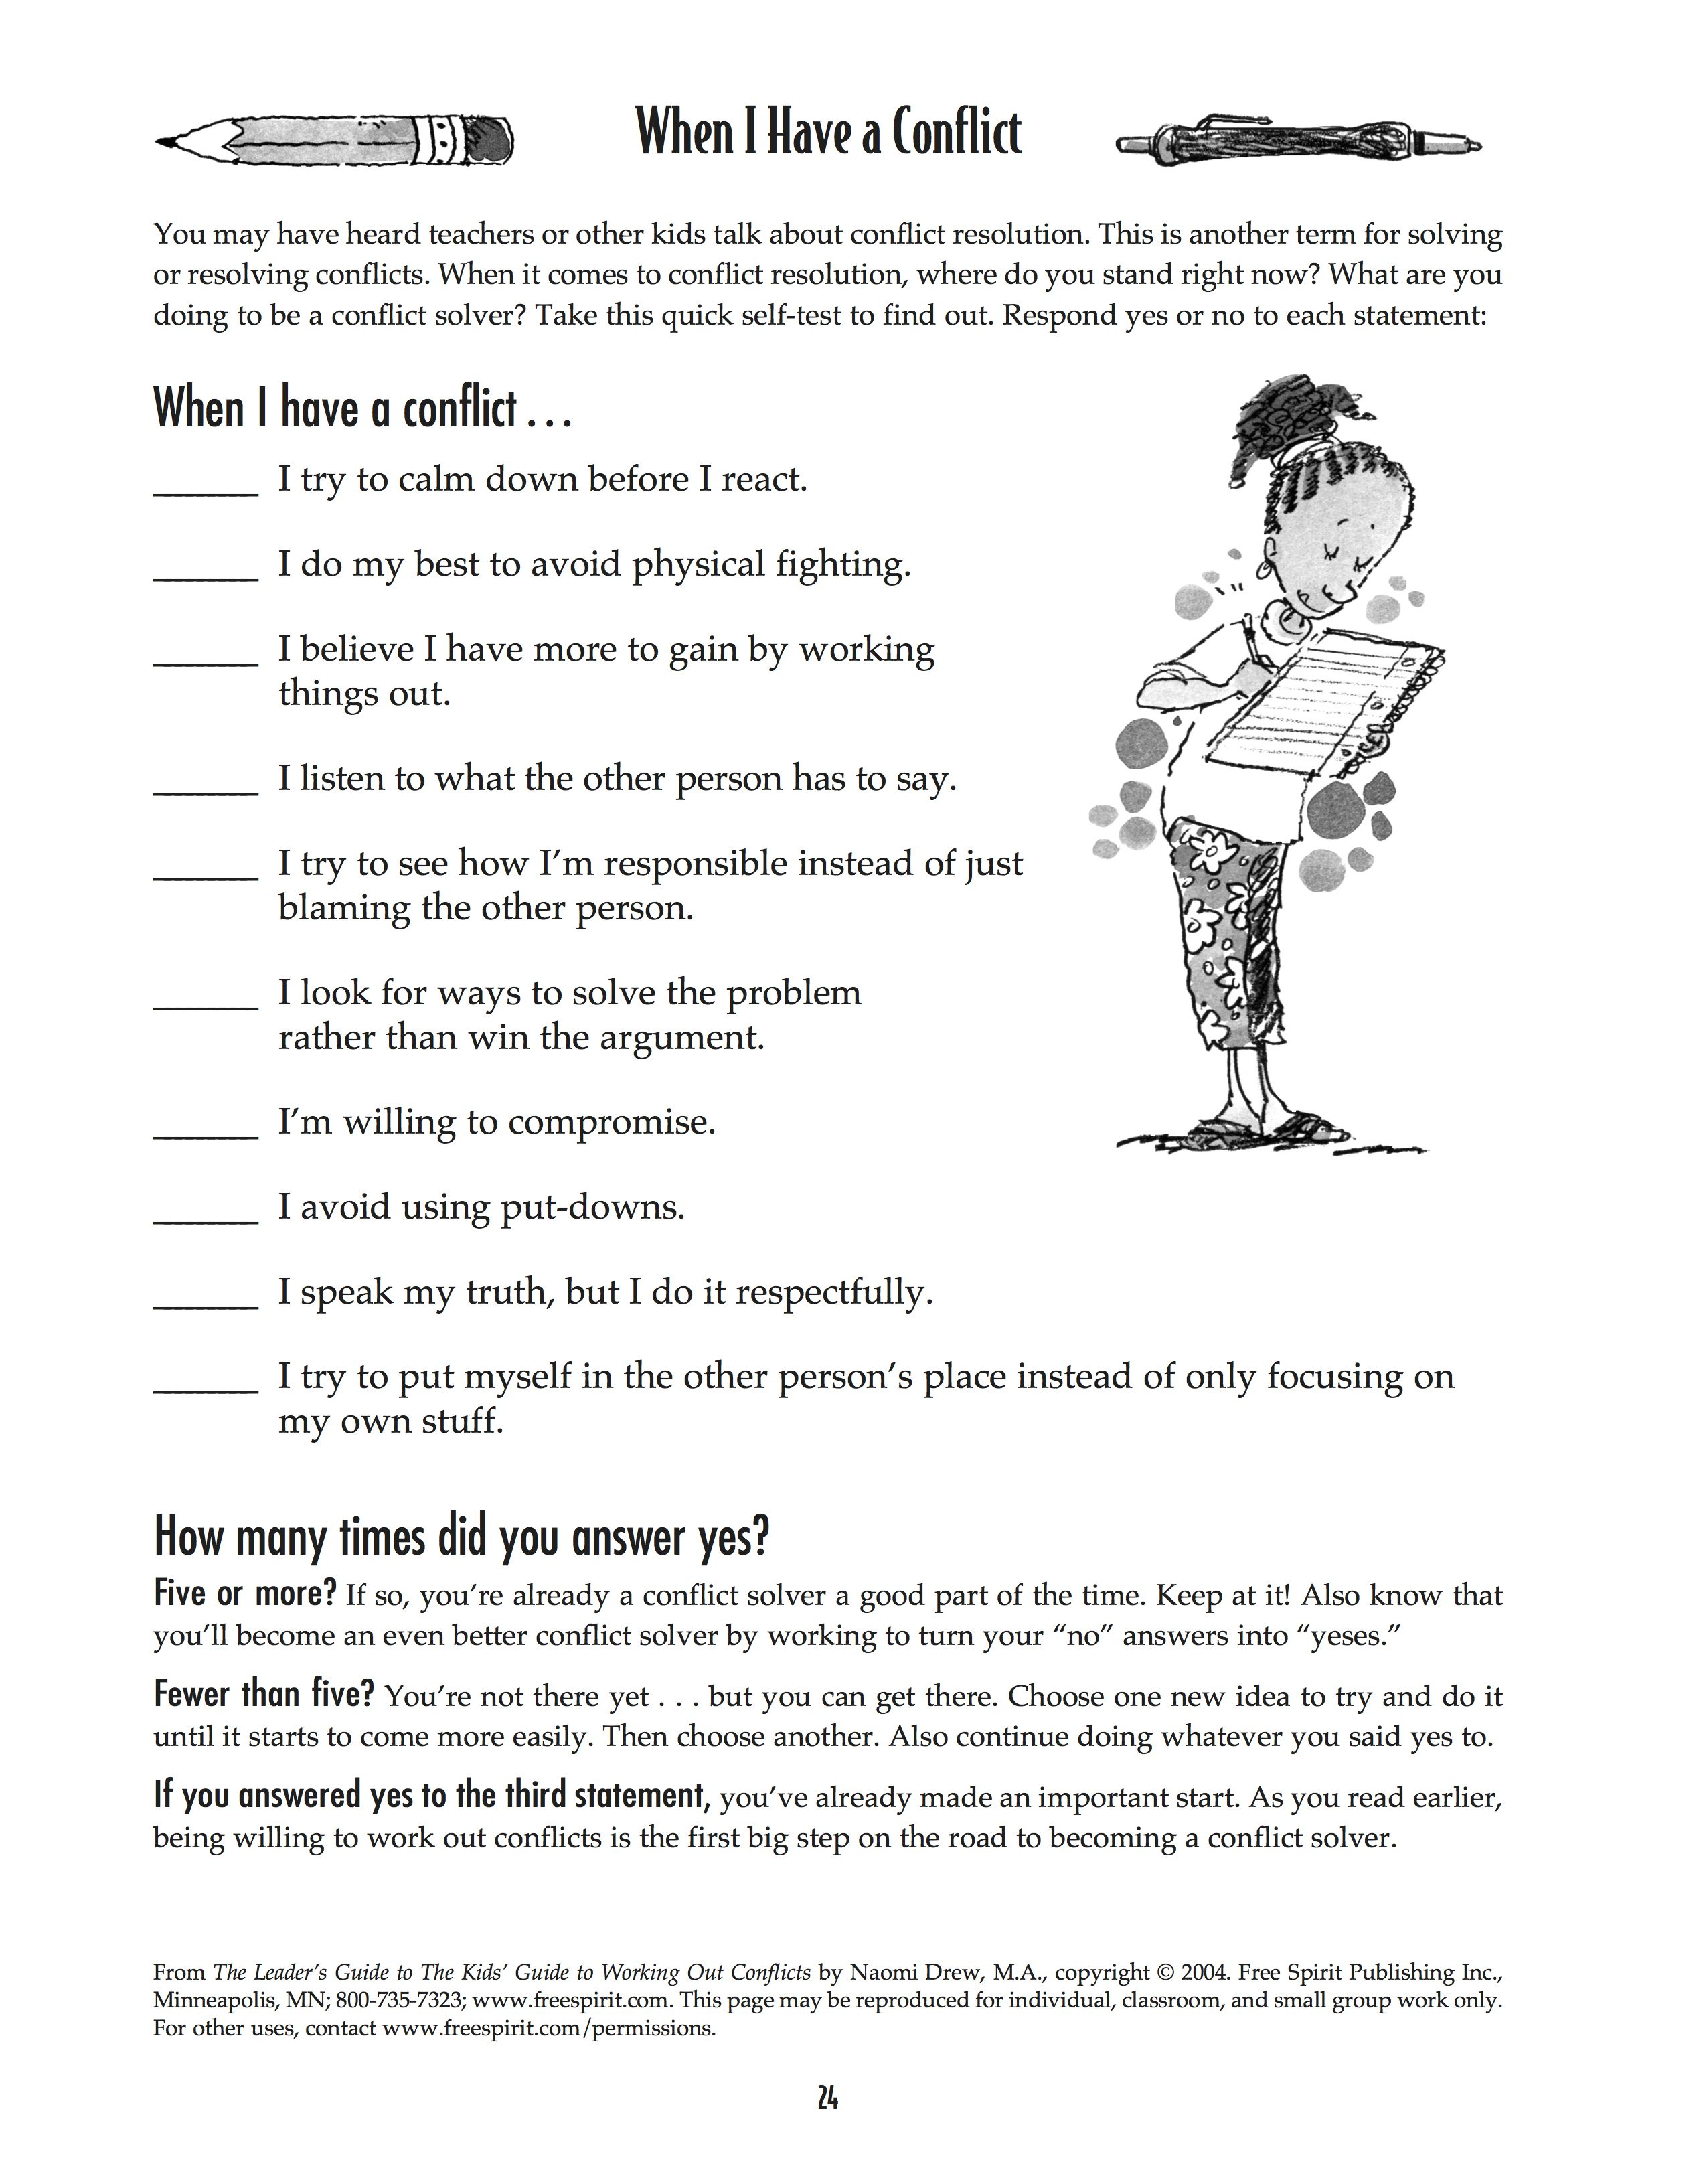 Free Printable Worksheet: When I Have A Conflict. A Quick Self-Test | Free Printable Social Stories Worksheets